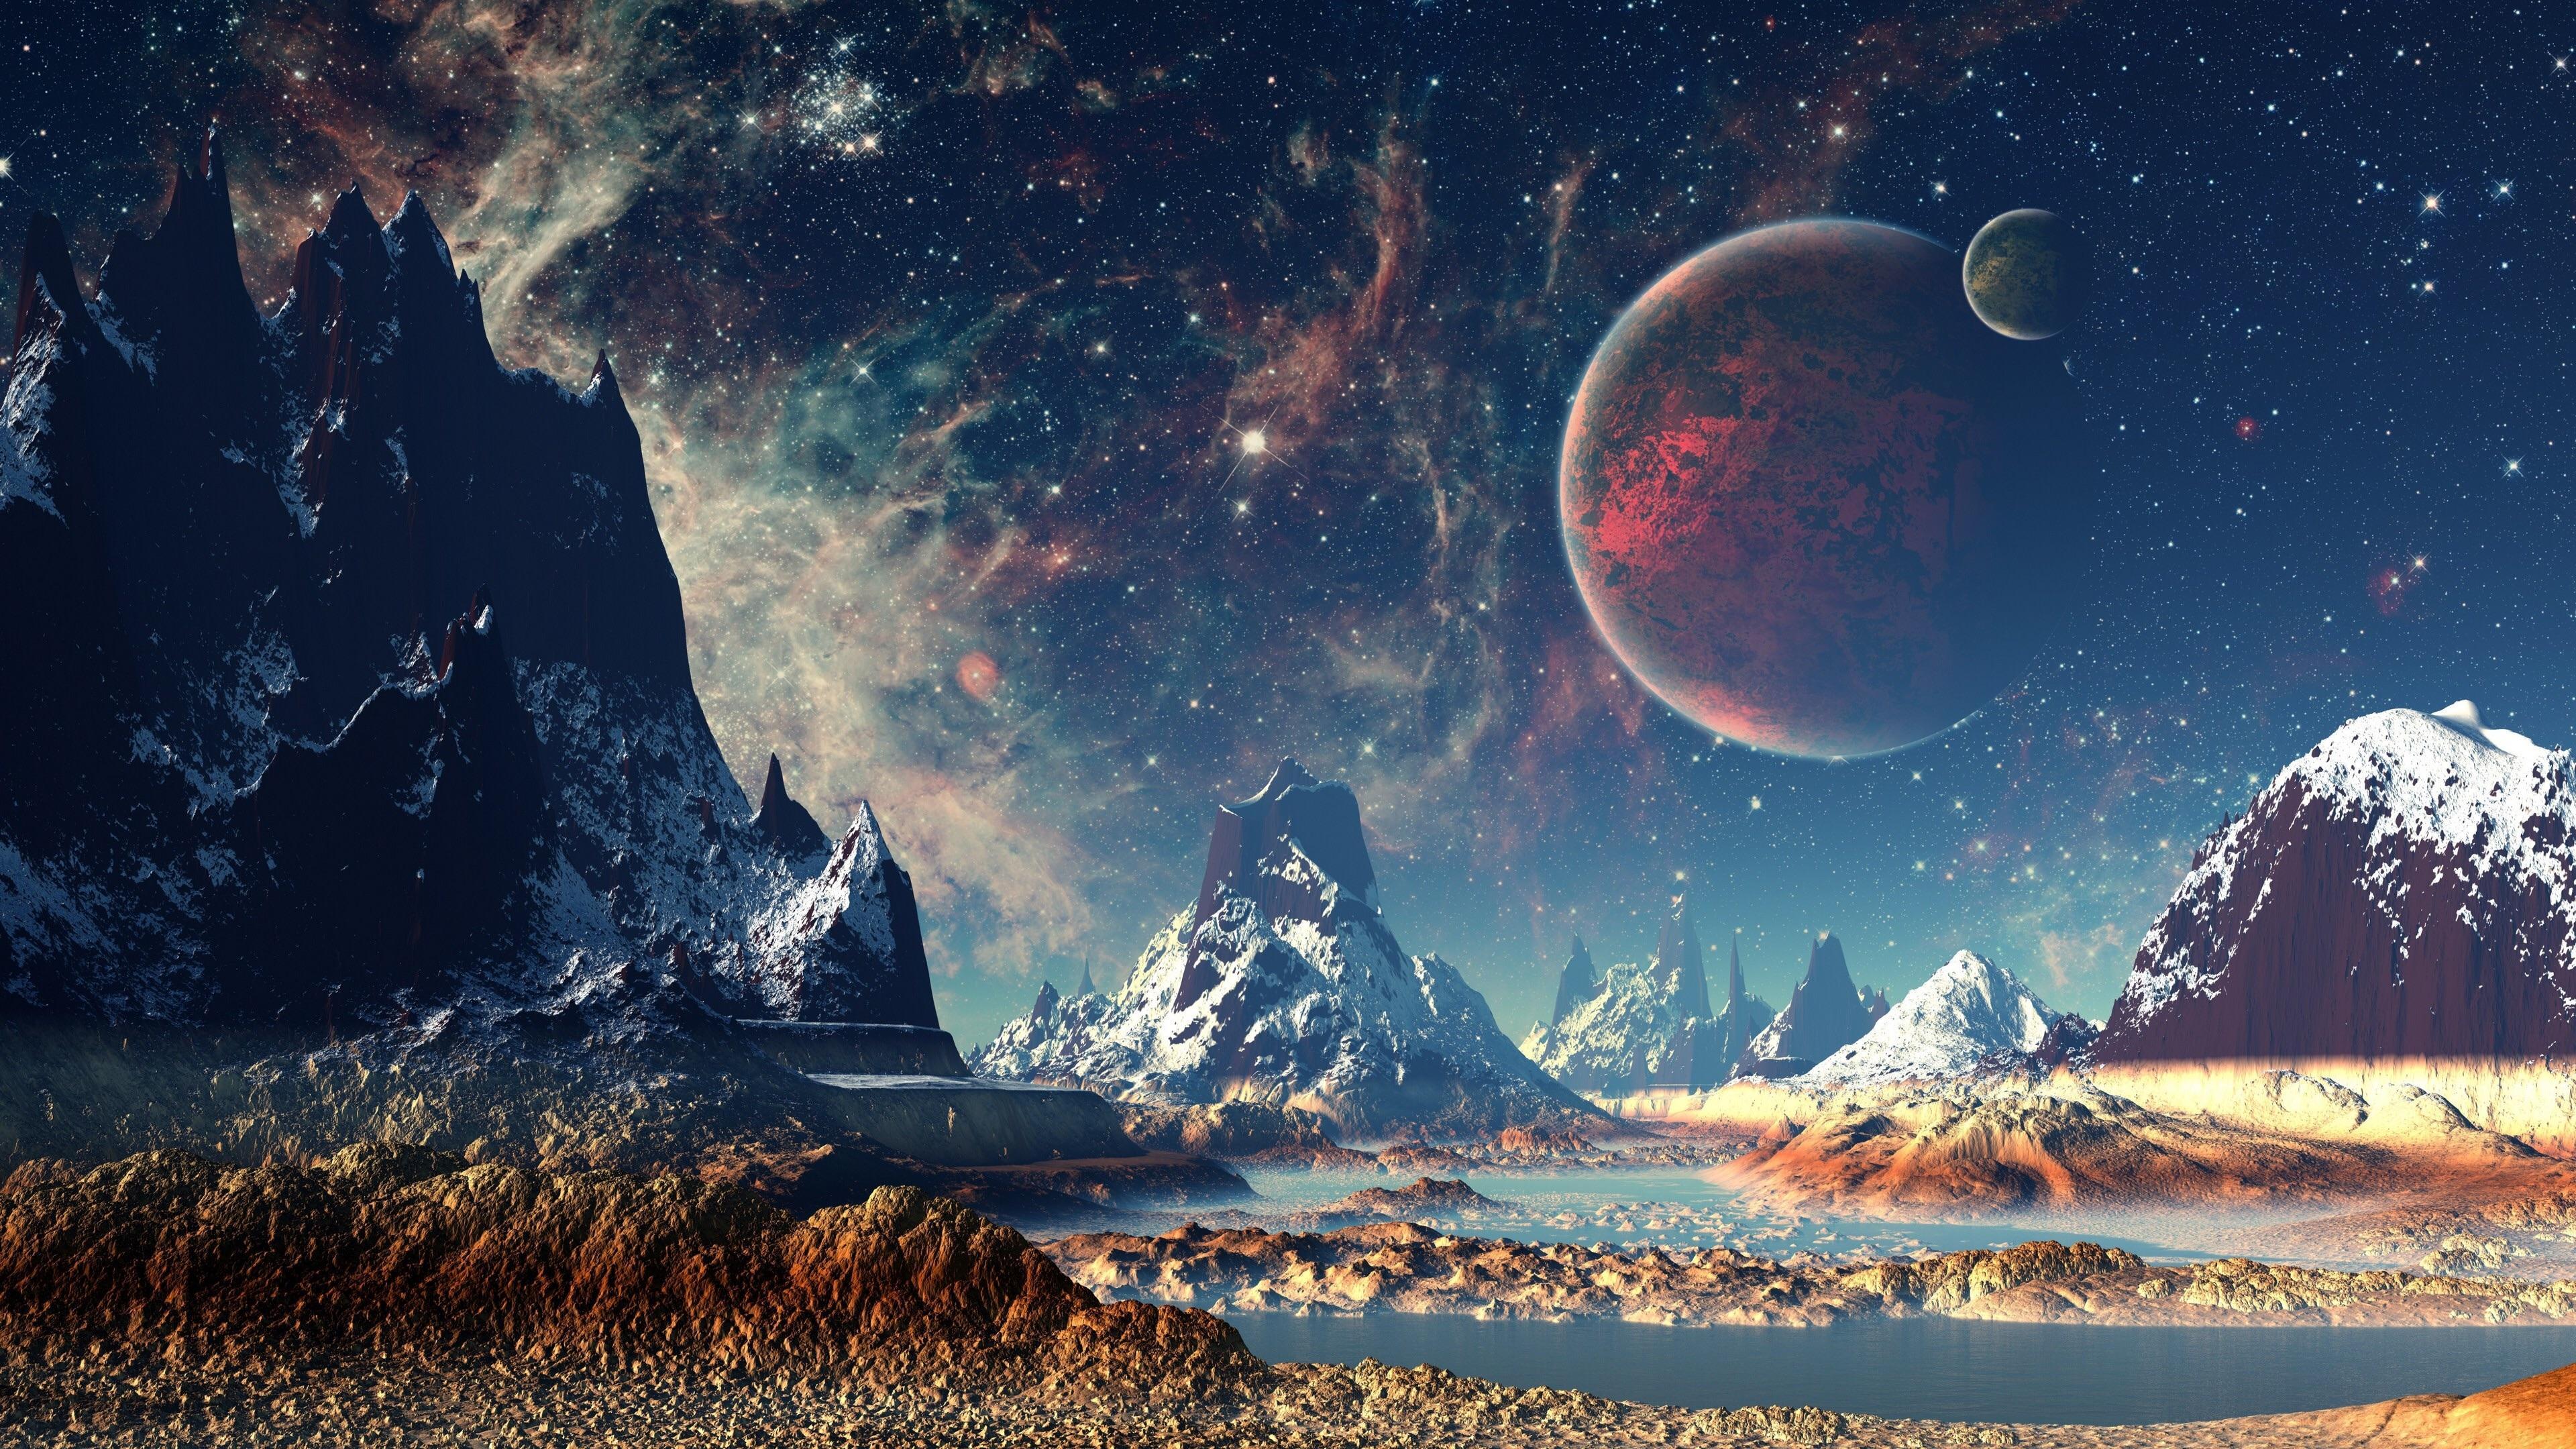 Awesome Space Fantasy Wallpaper HD by PocketDynamite on DeviantArt